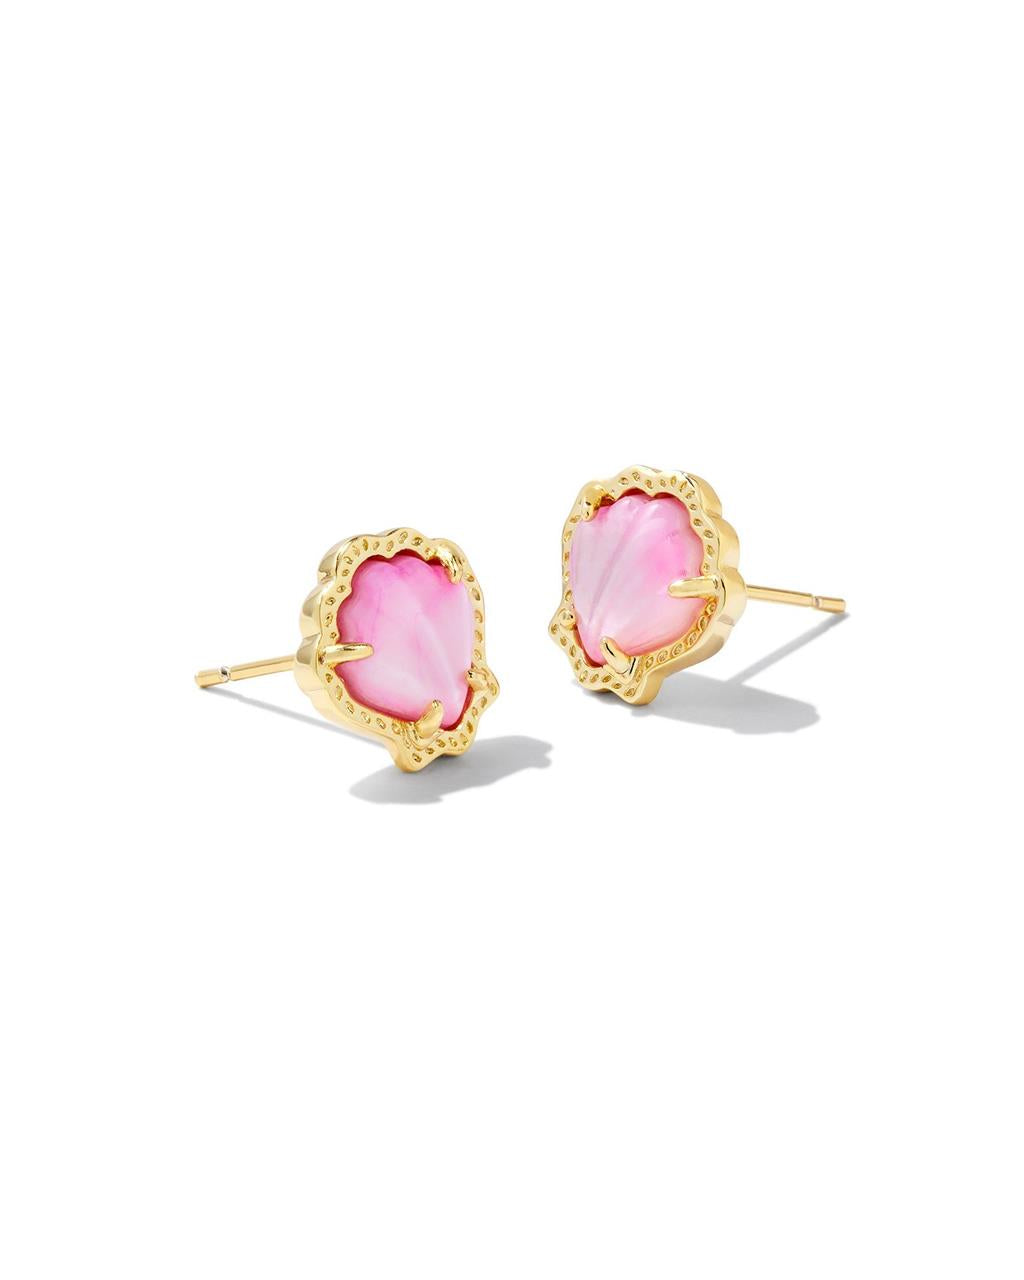 BRYNNE SHELL STUD EARRINGS GOLD BLUSH IVORY MOTHER OF PEARL